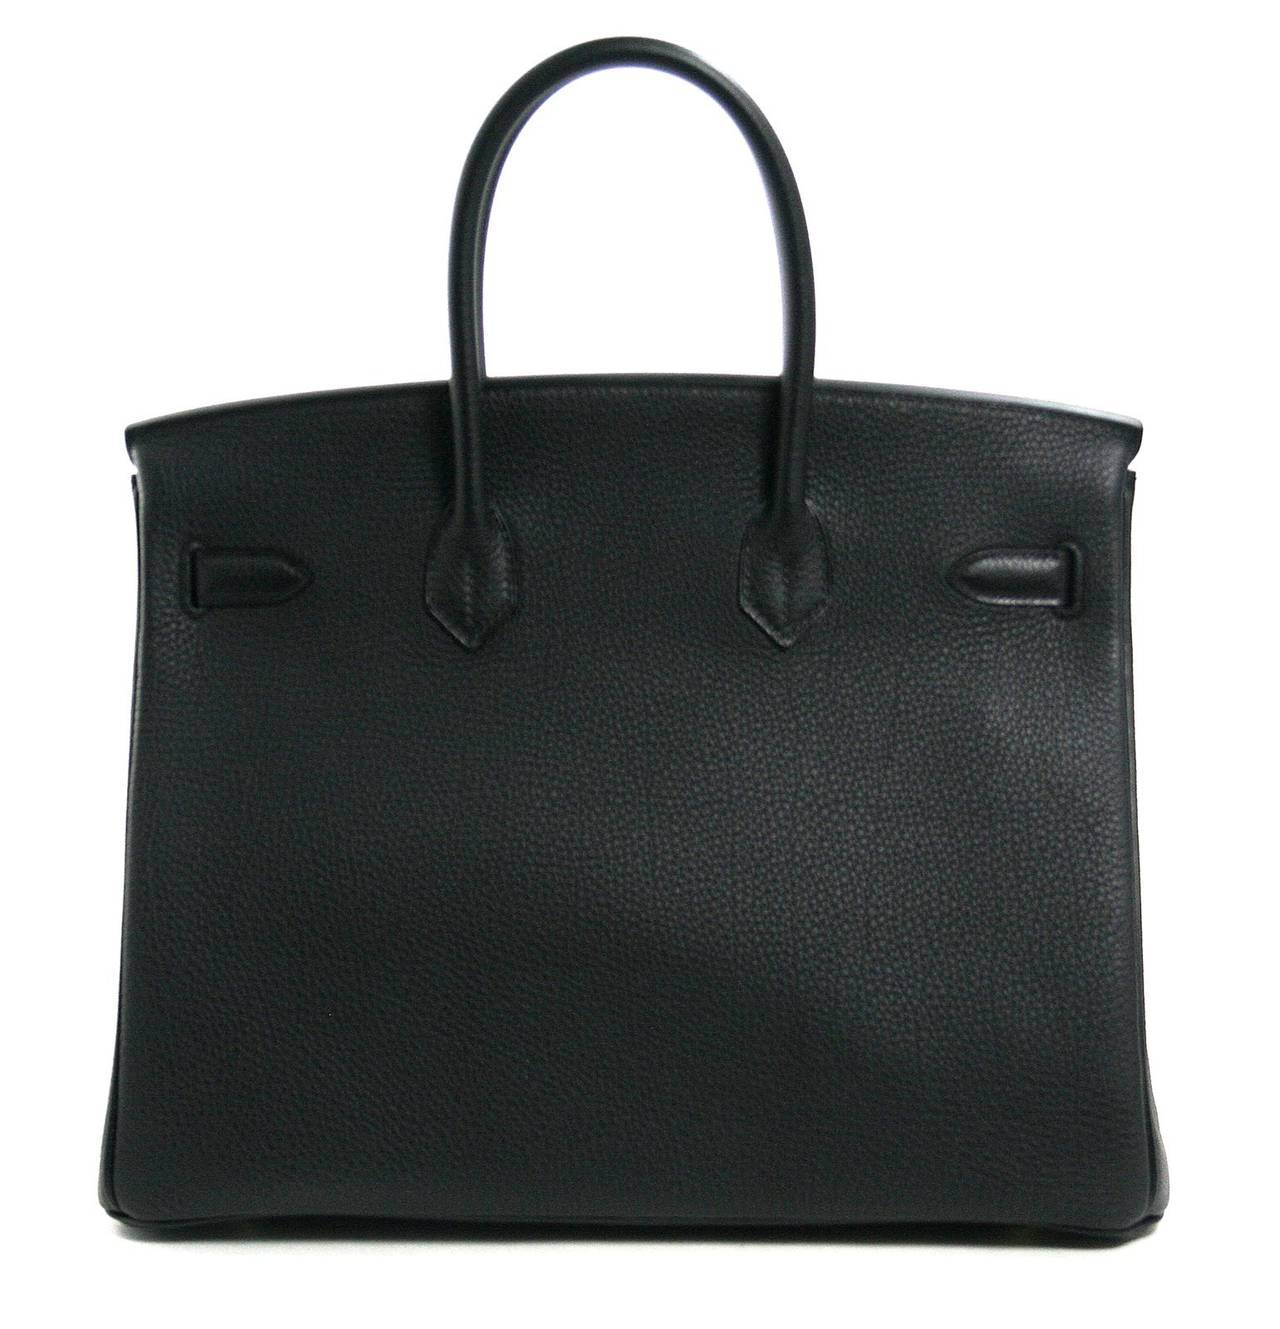 Never before carried, this Hermès Black 40 cm Togo Leather Birkin still has the plastic intact on the hardware.     Considered the ultimate luxury item the world over and hand stitched by skilled craftsmen, wait lists for the Birkin often exceed a